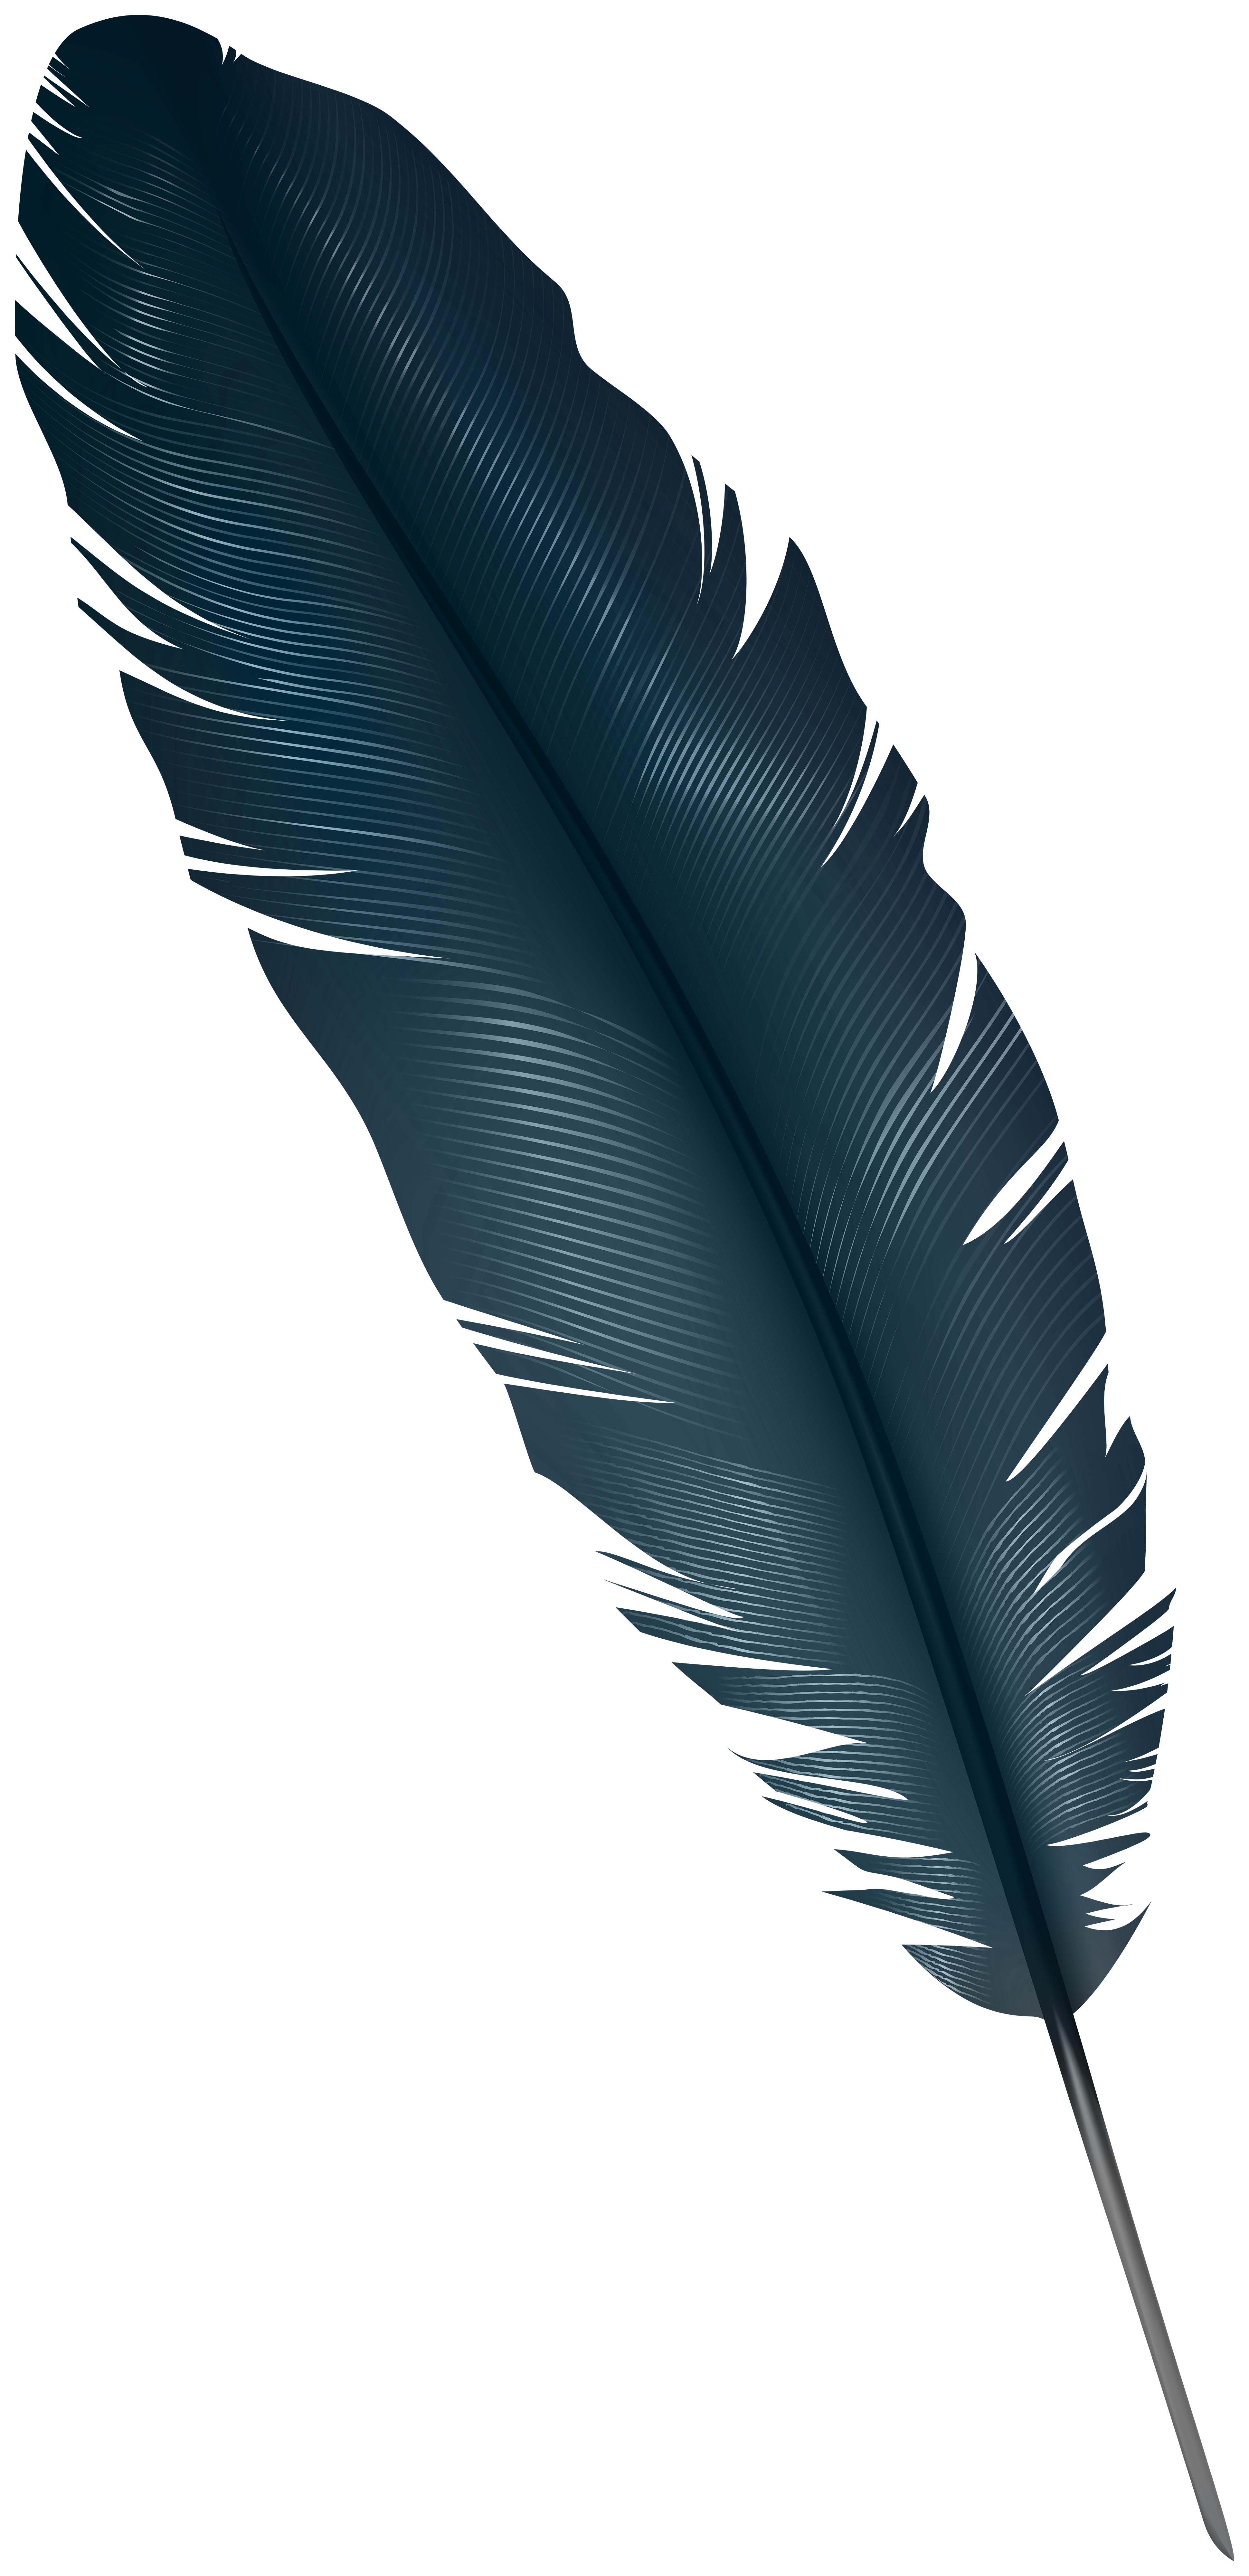 White Feather PNG Clip Art Image​  Gallery Yopriceville - High-Quality  Free Images and Transparent PNG Clipart